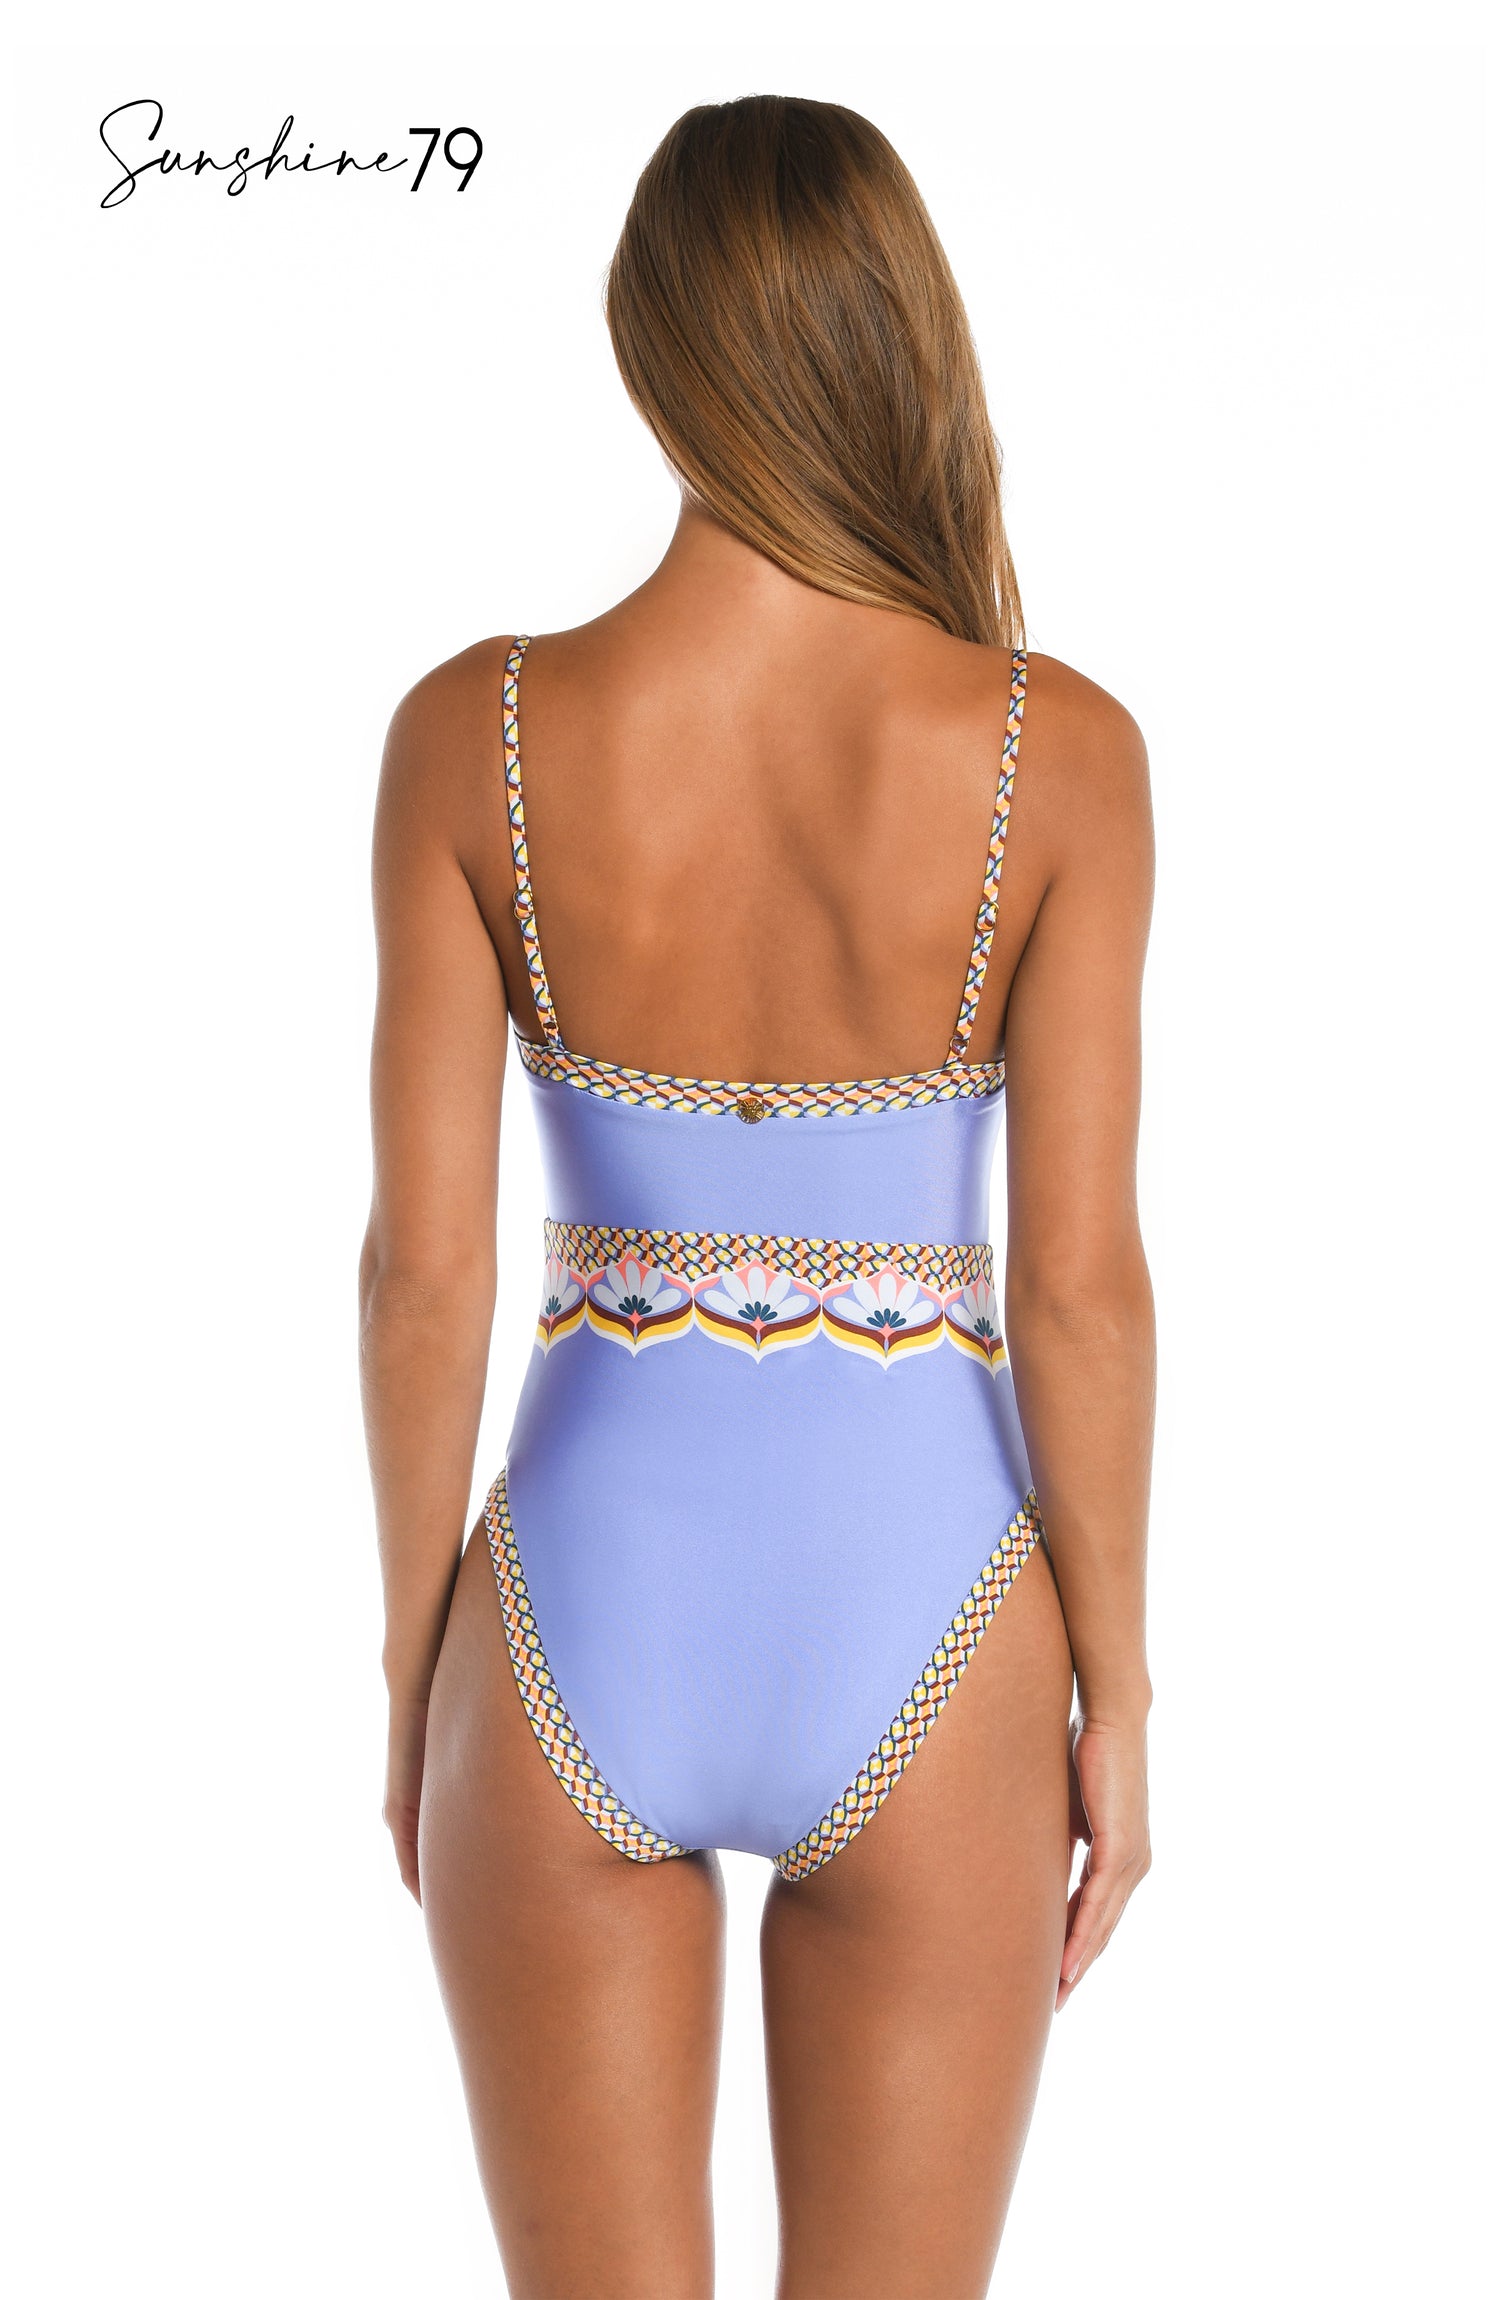 Model is wearing a light purple geometric printed over the shoulder one piece from our Sunshine 79 brand.